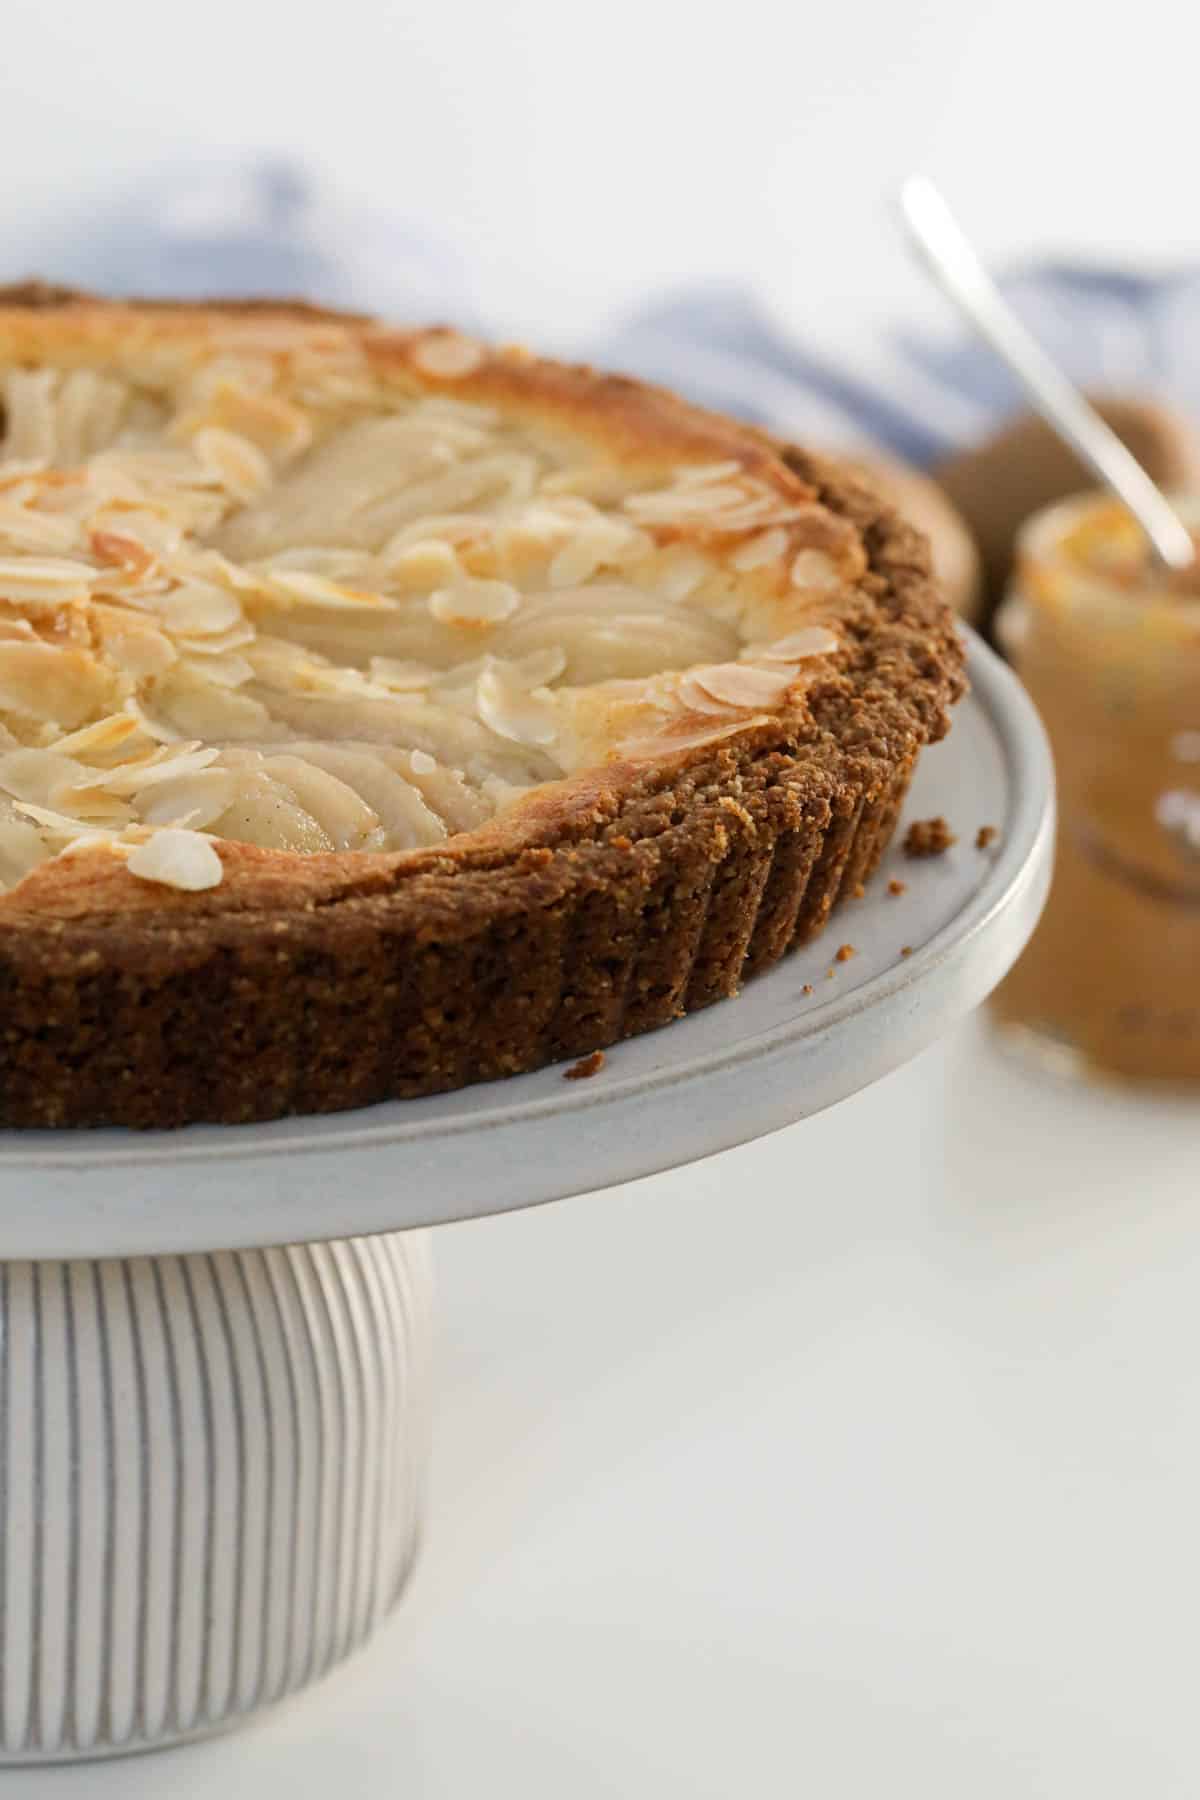 Pear and almond tart served on a cake stand.